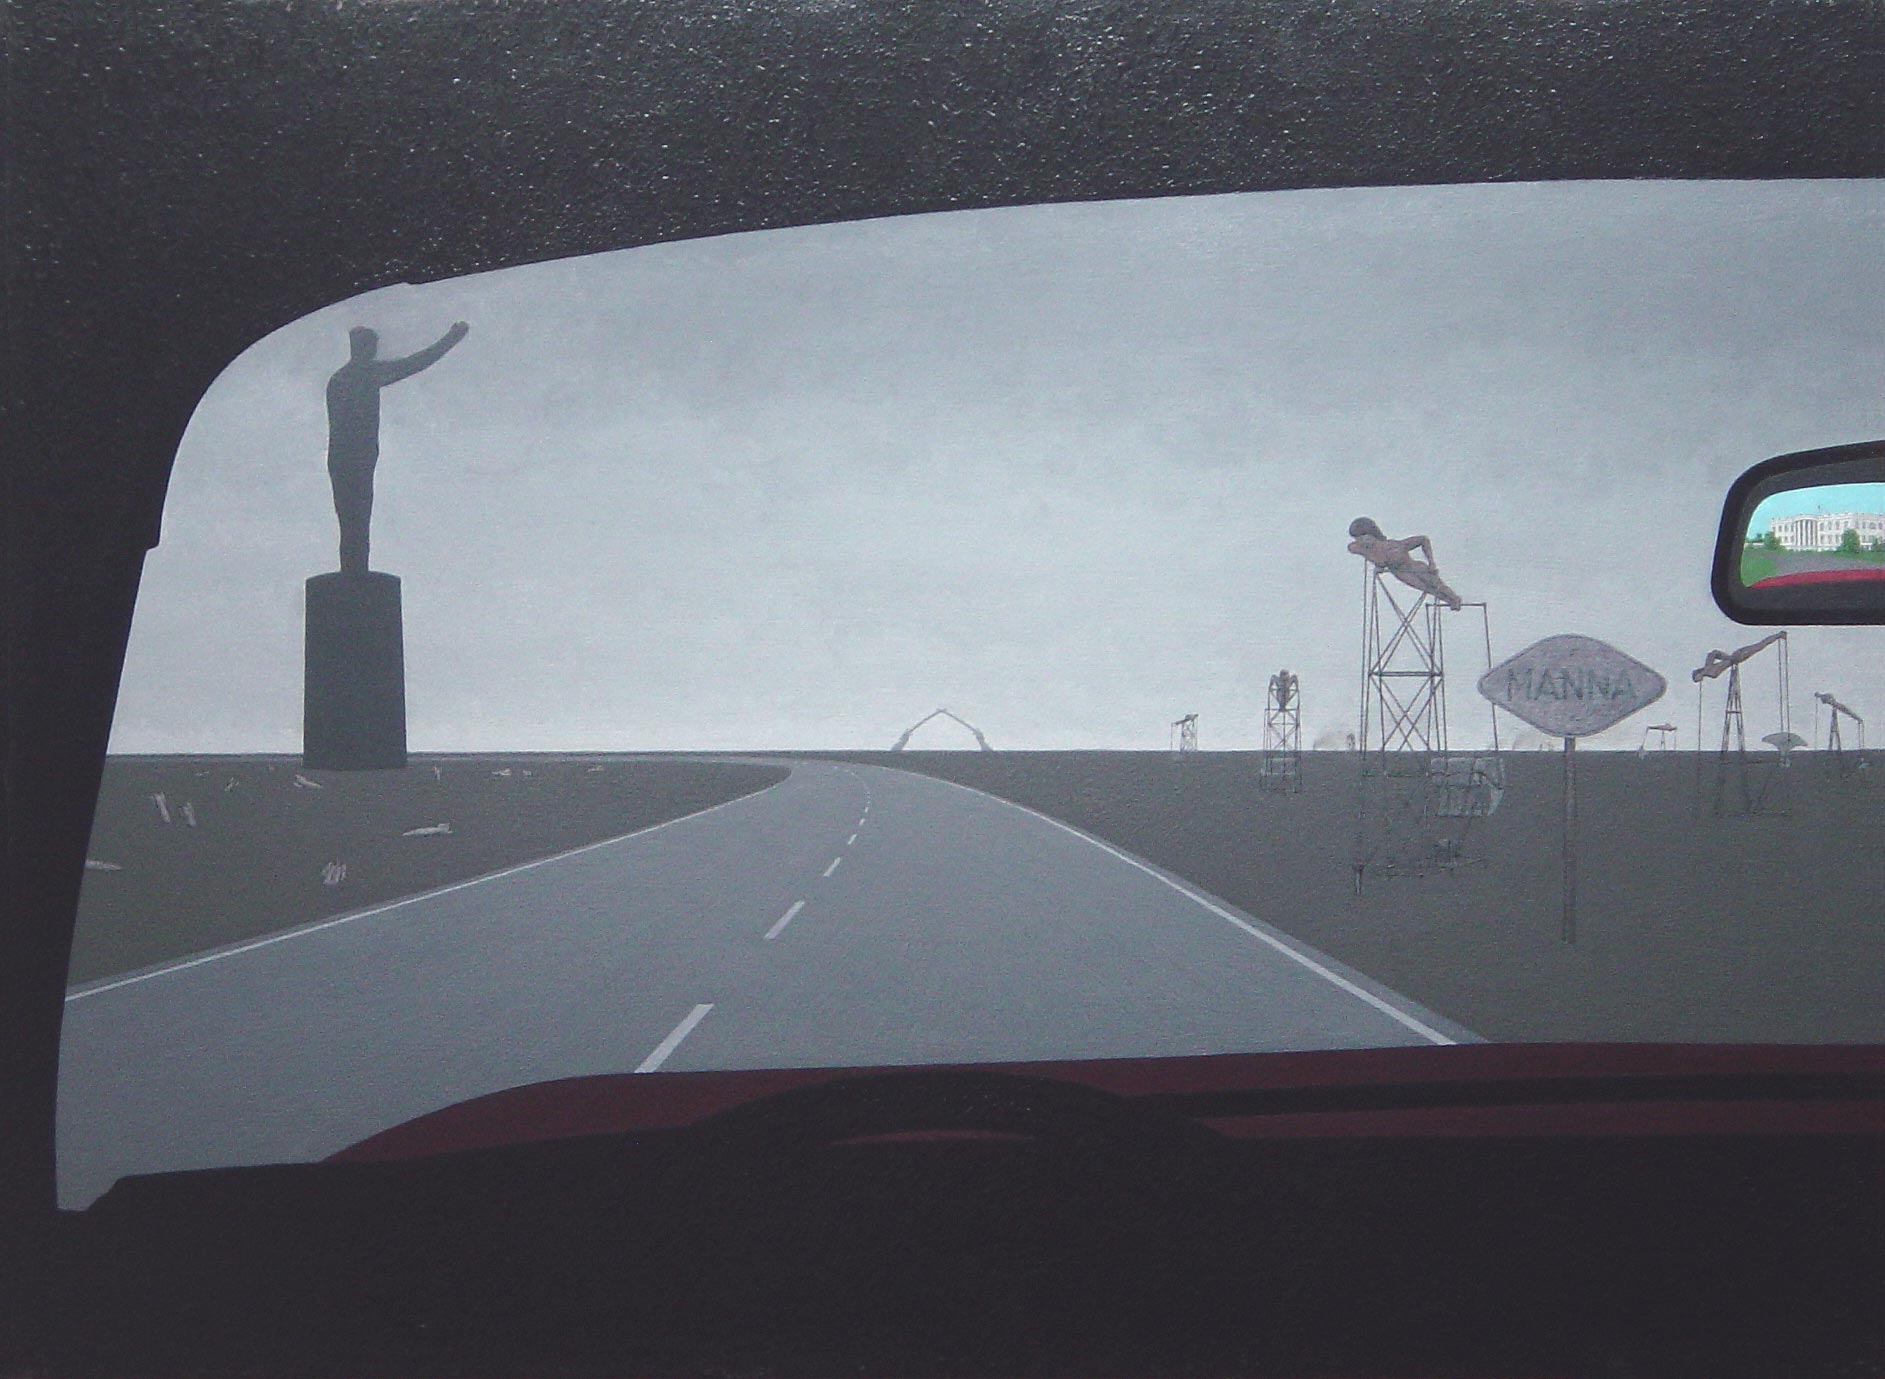 View from the driver's seat of a car, showing highway running through desert with huge statue to the left and naked women on oil wells to the right